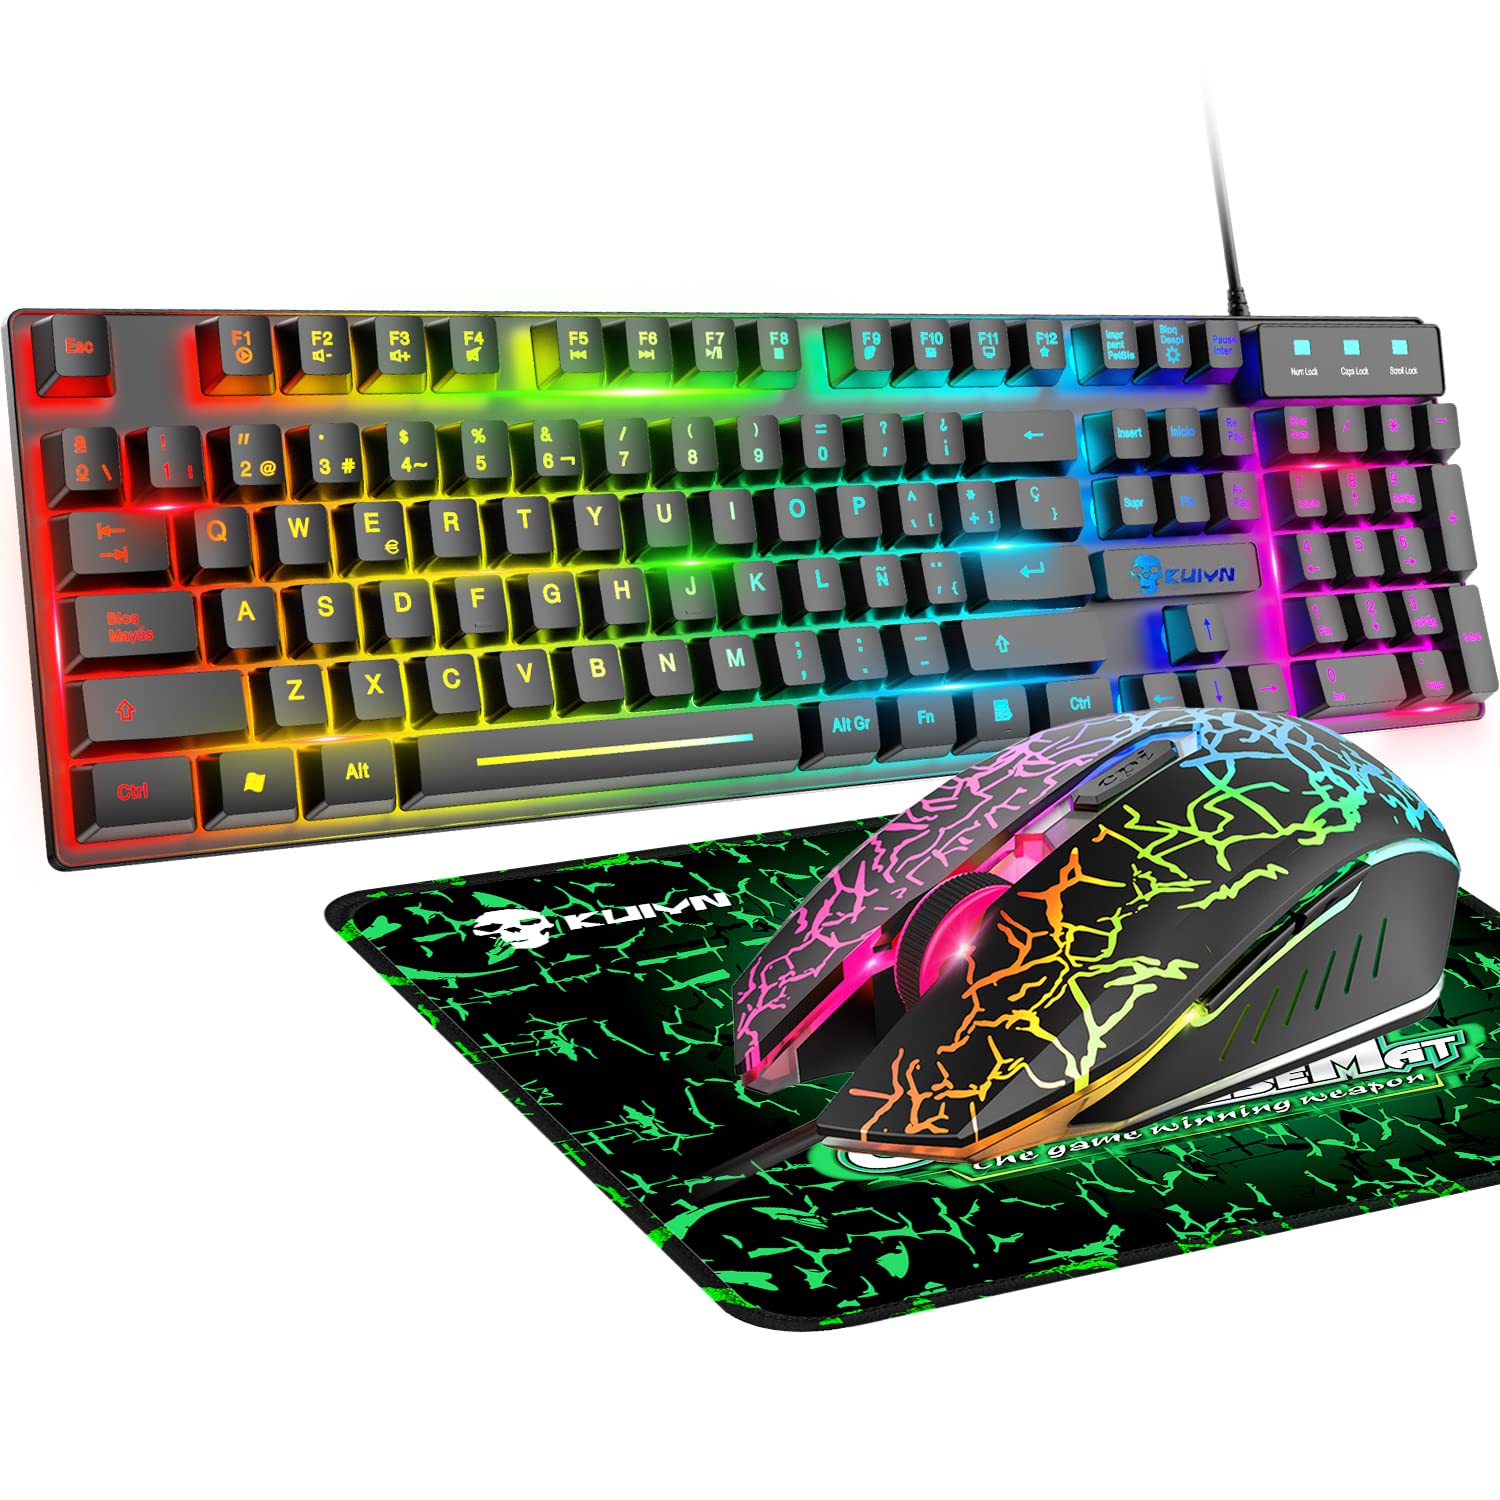 Multi-color LED backlit gaming keyboard and mouse combo